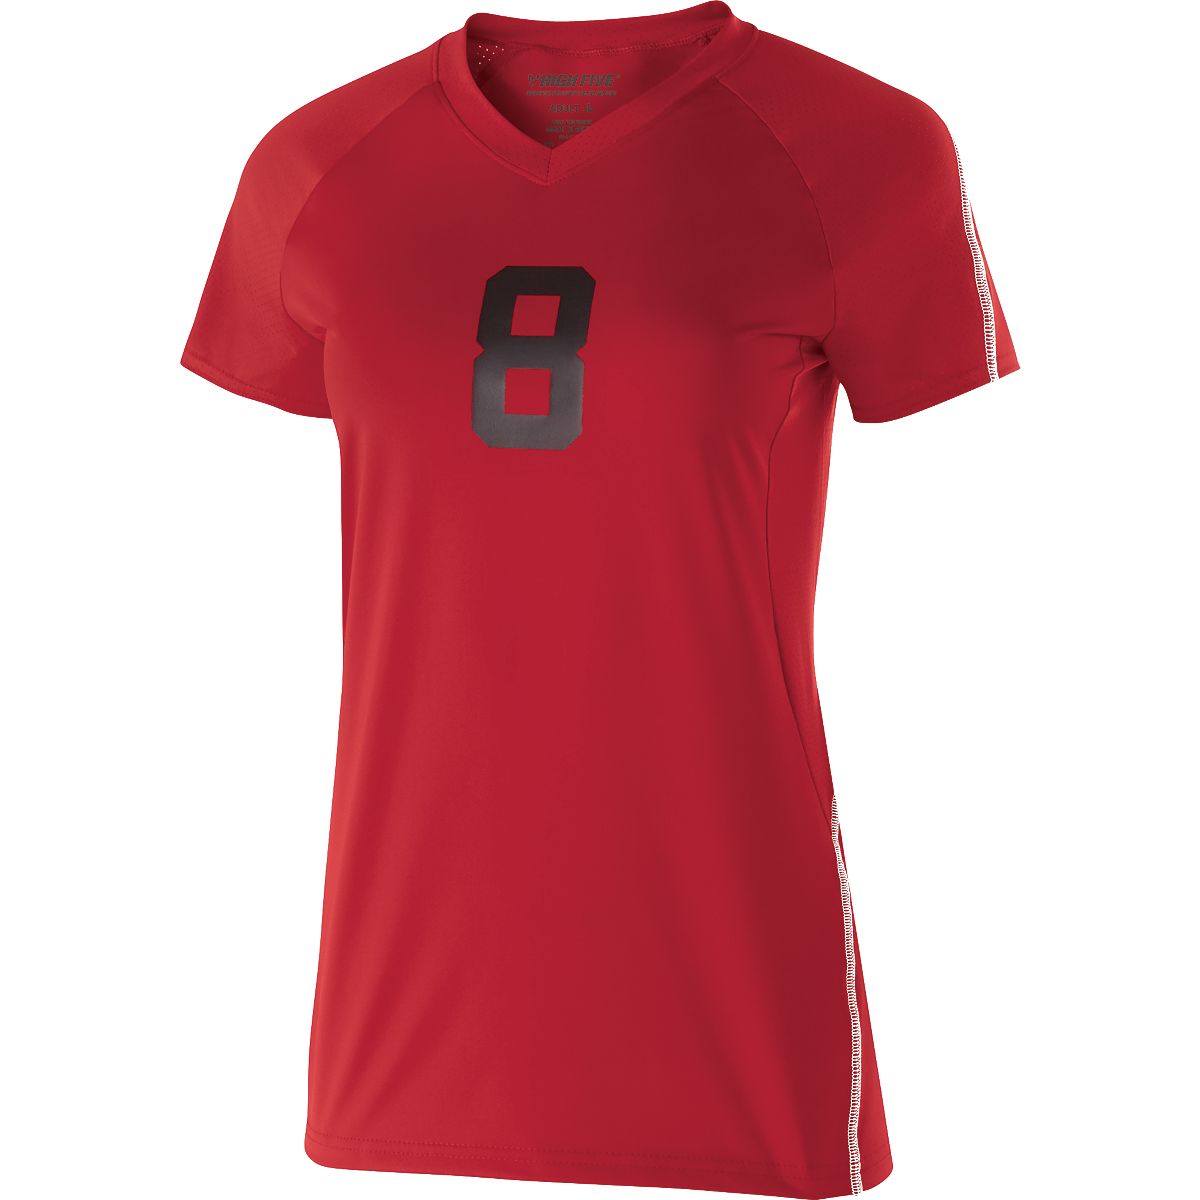 Ladies' Solid Volleyball Jersey S/s